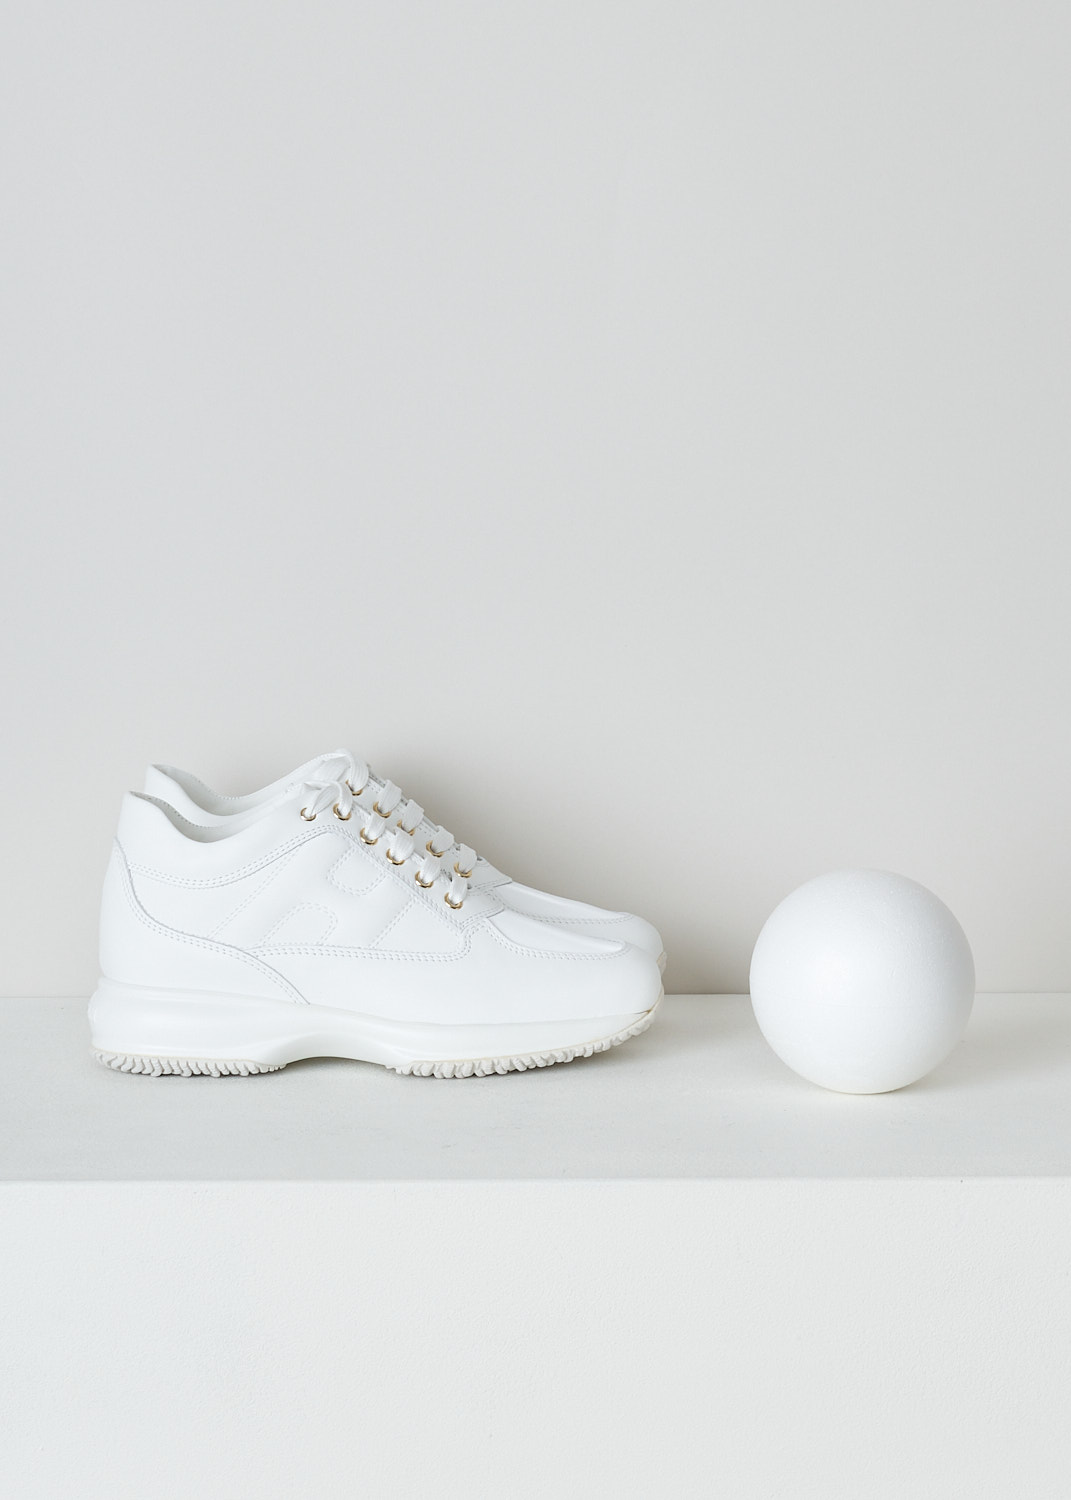 HOGAN, ALL-WHITE INTERACTIVE DONNA SNEAKERS, HXW00N00E10MYYB001_MYY, White, Side, These white leather sneakers feature front lace-up fastening with white laces. These sneakers have a almond shaped toe and a white rubber sole. On the sides, the sneakers have the brand's H logo incorporated in the design.  
